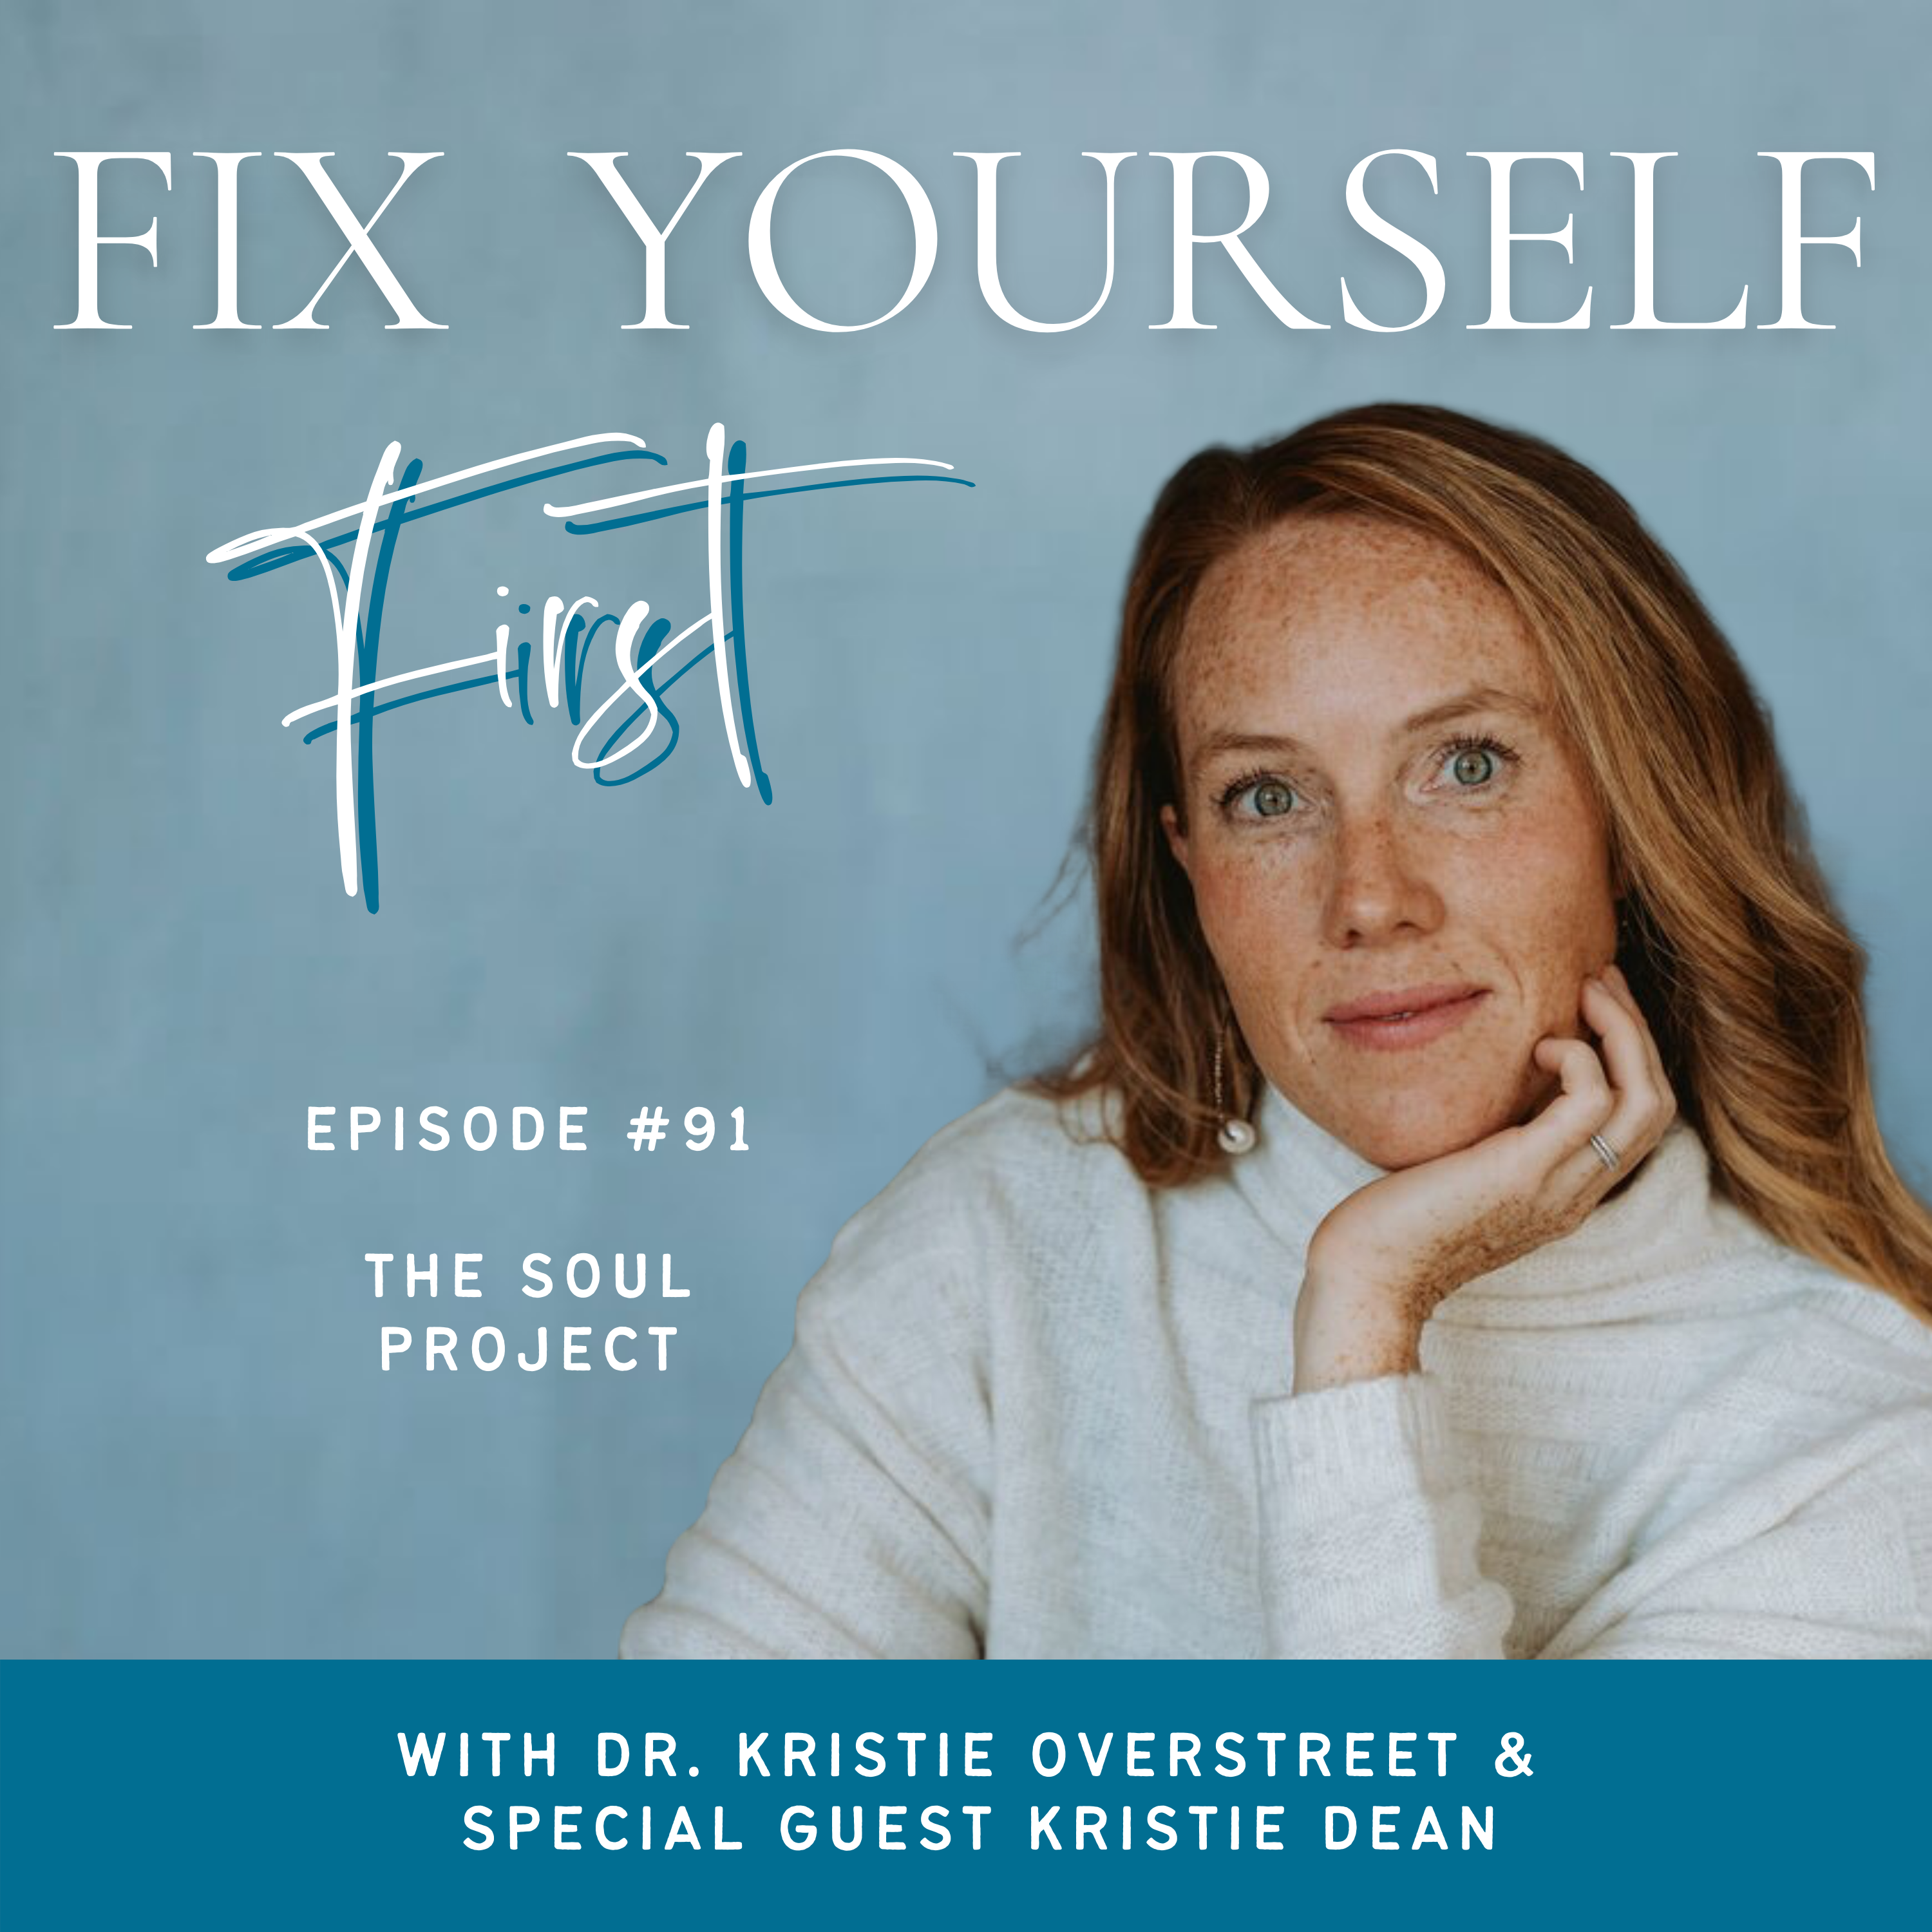 Fix Yourself First Episode 91 The Soul Project with Kristie Dean